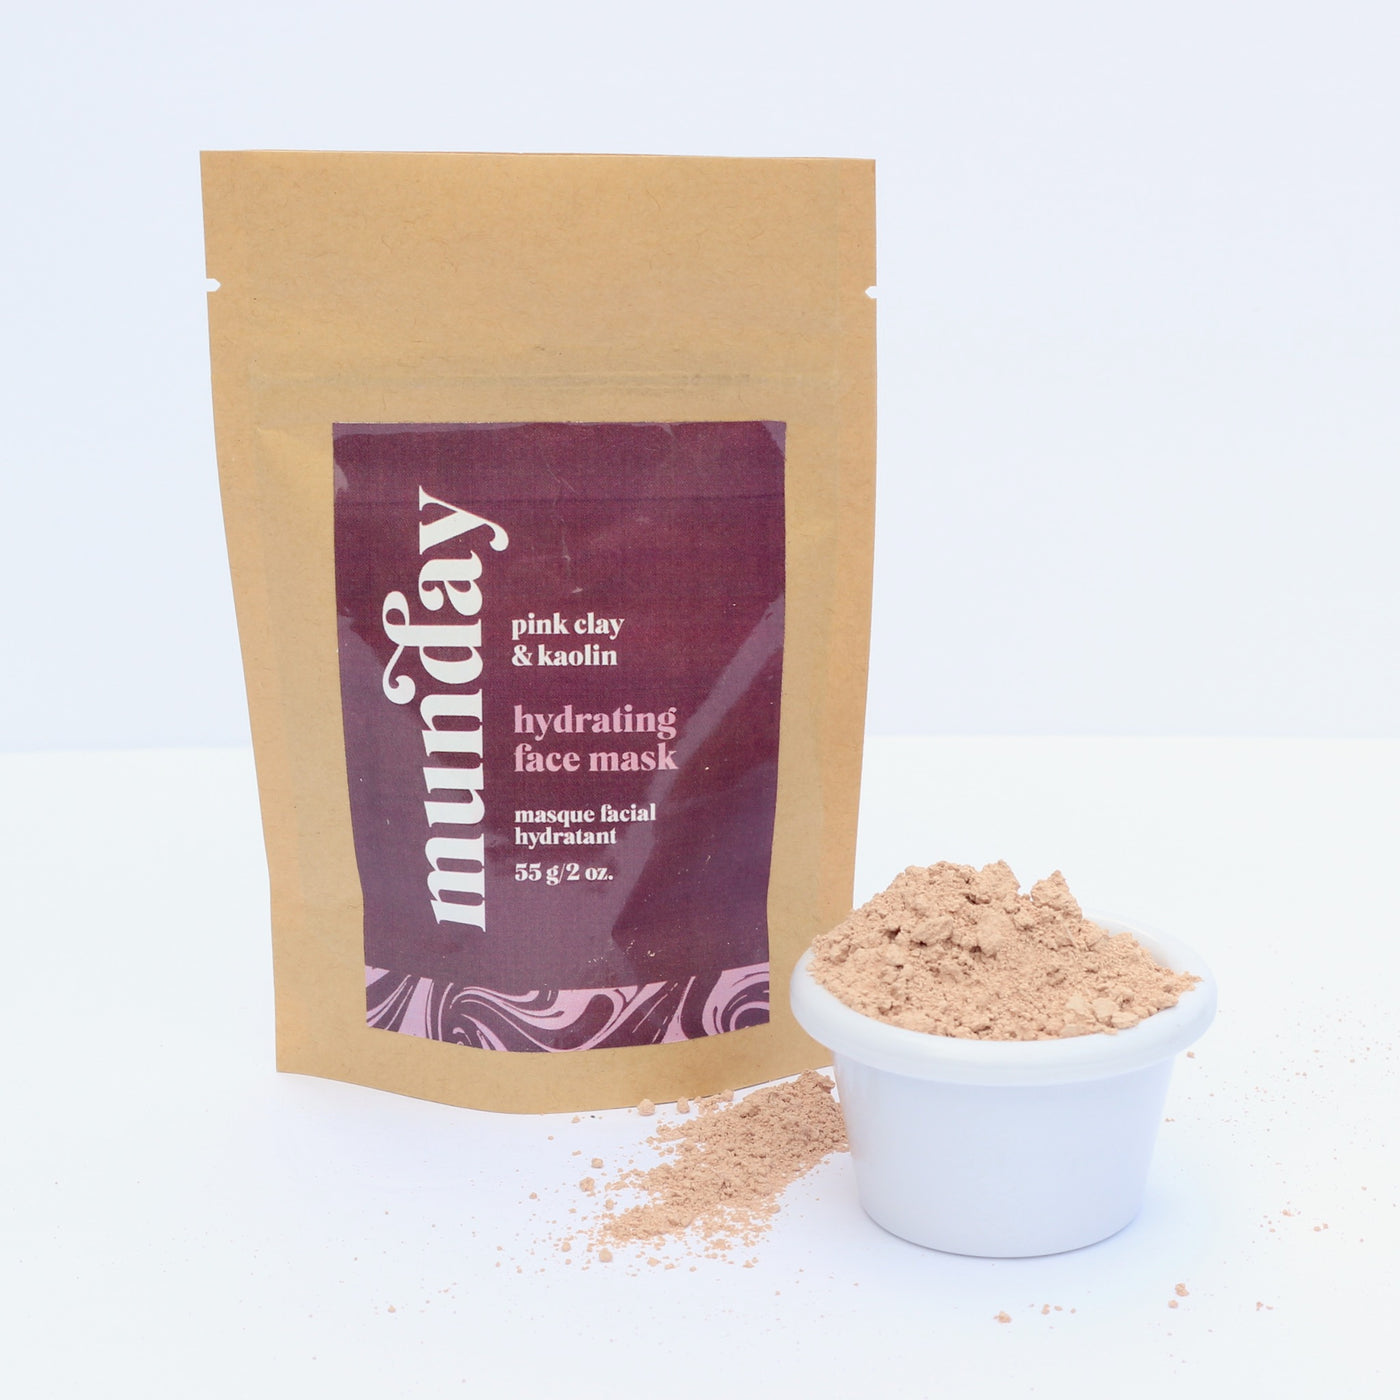 Hydrating Face Mask with pink clay, kaolin, rose petals, hibiscus and rose essential oil